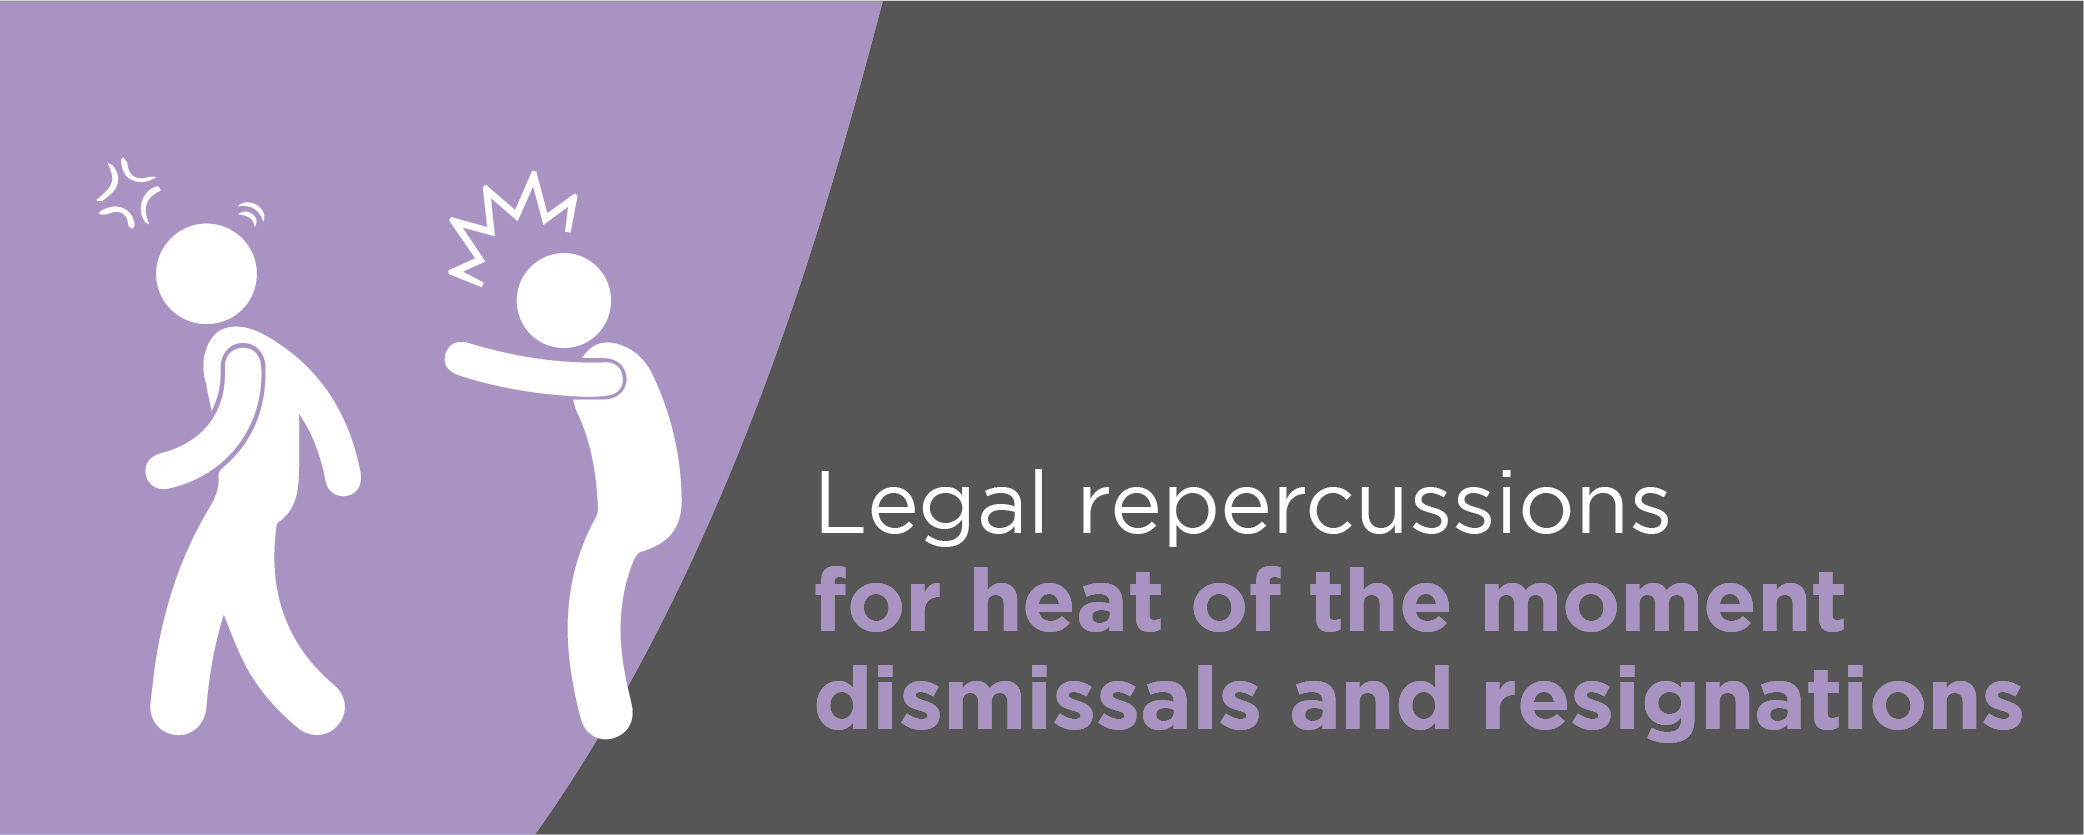 Legal repercussions for heat of the moment dismissals and resignations